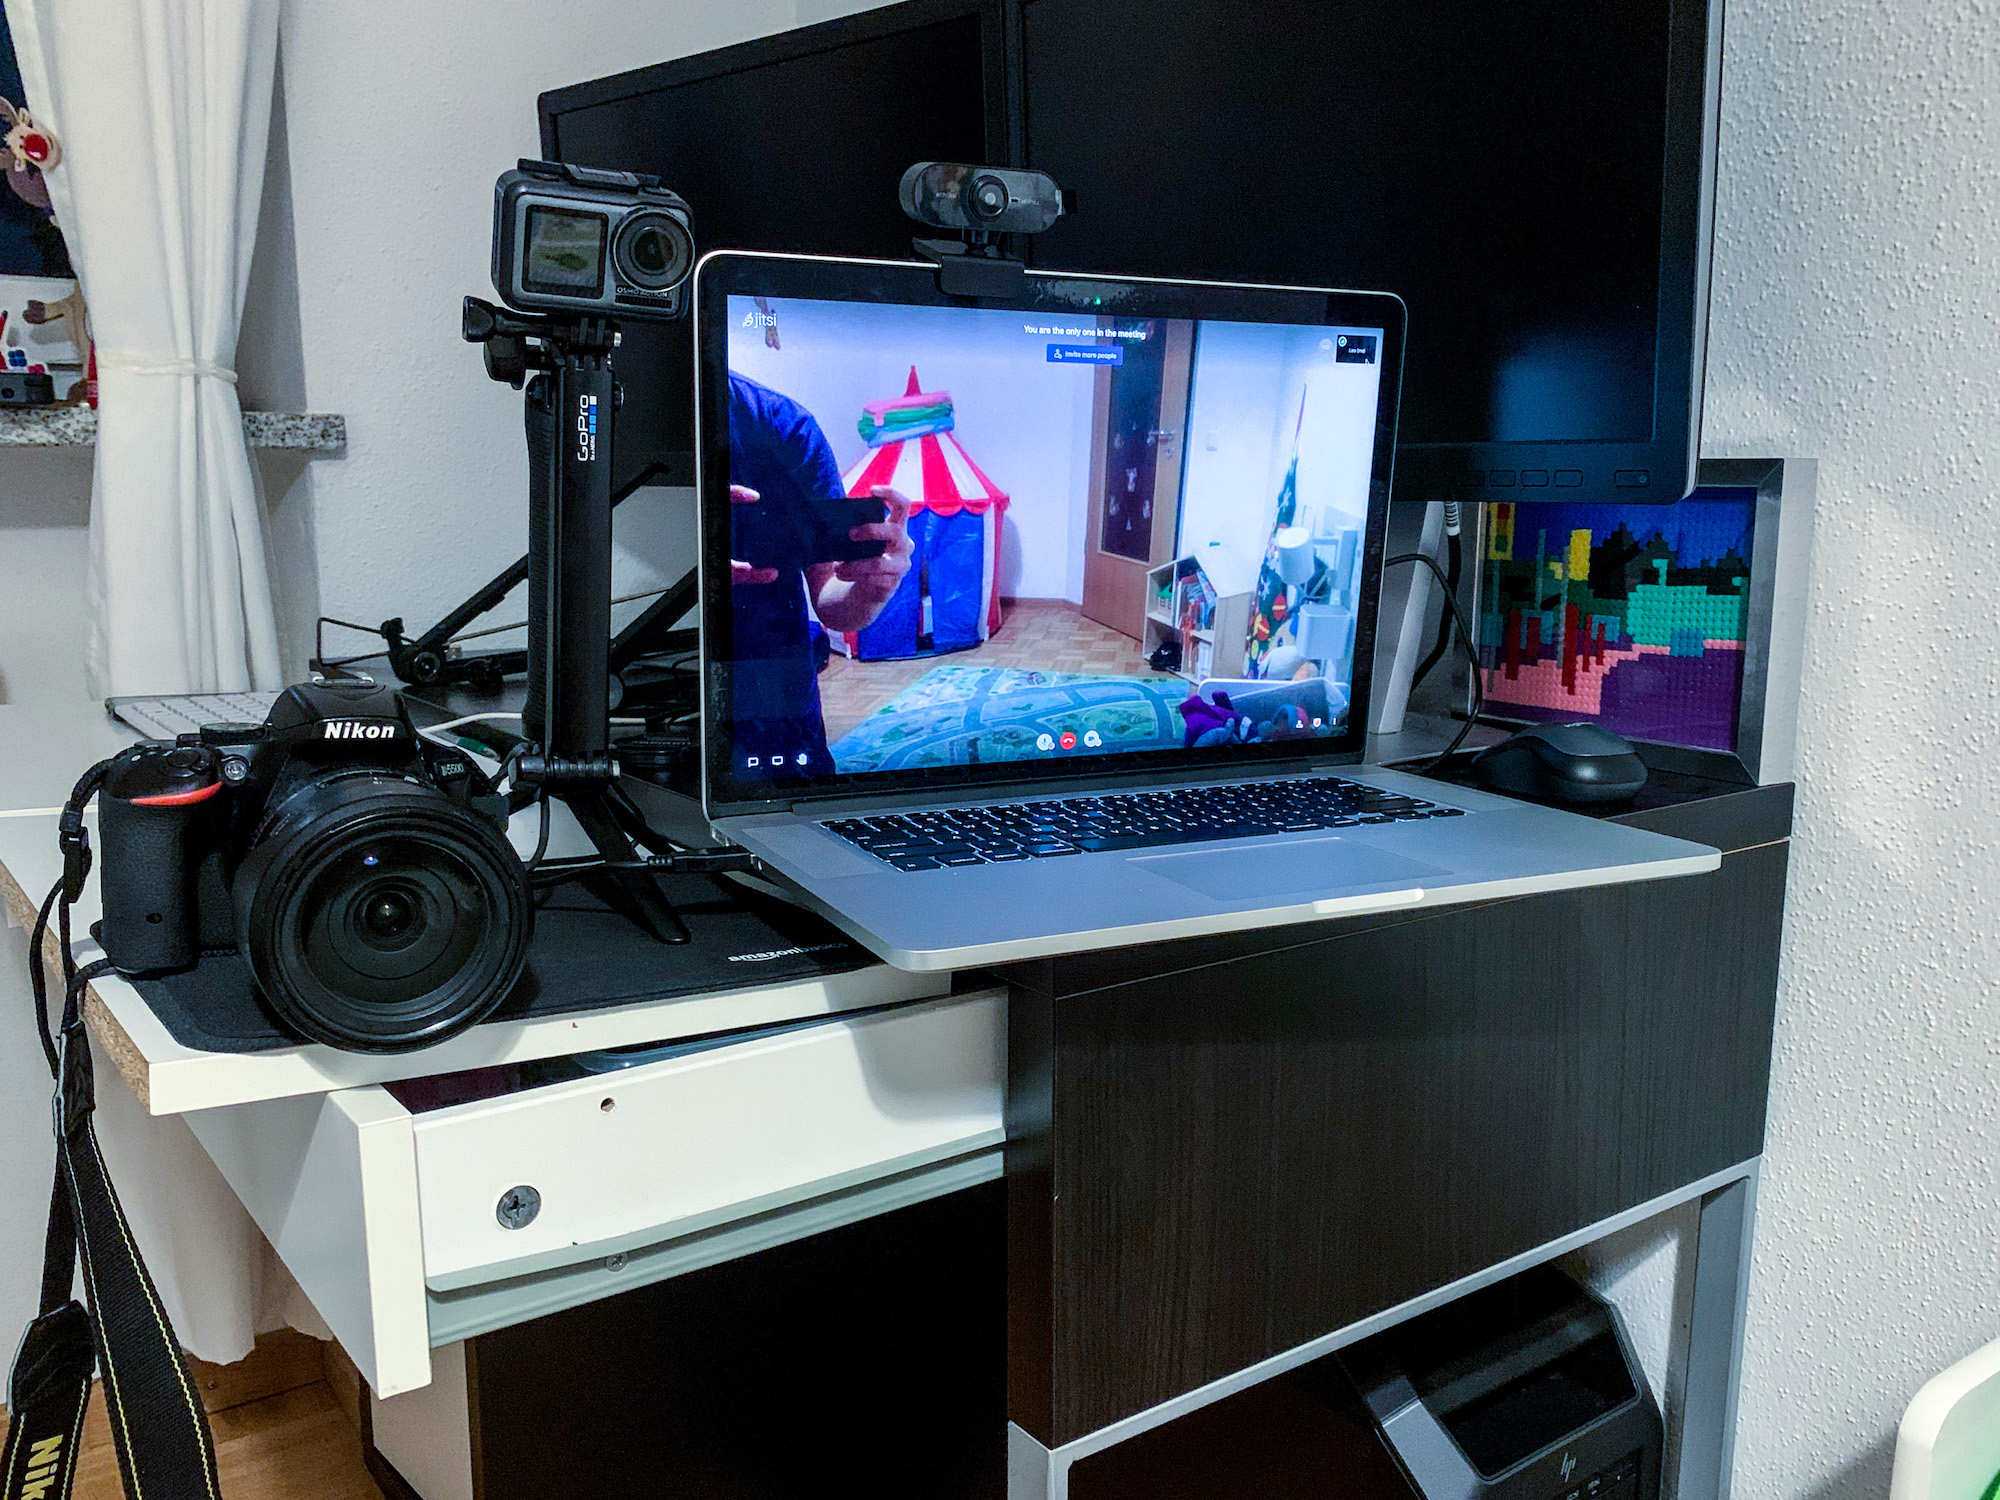 Testing different cameras for the streaming setup